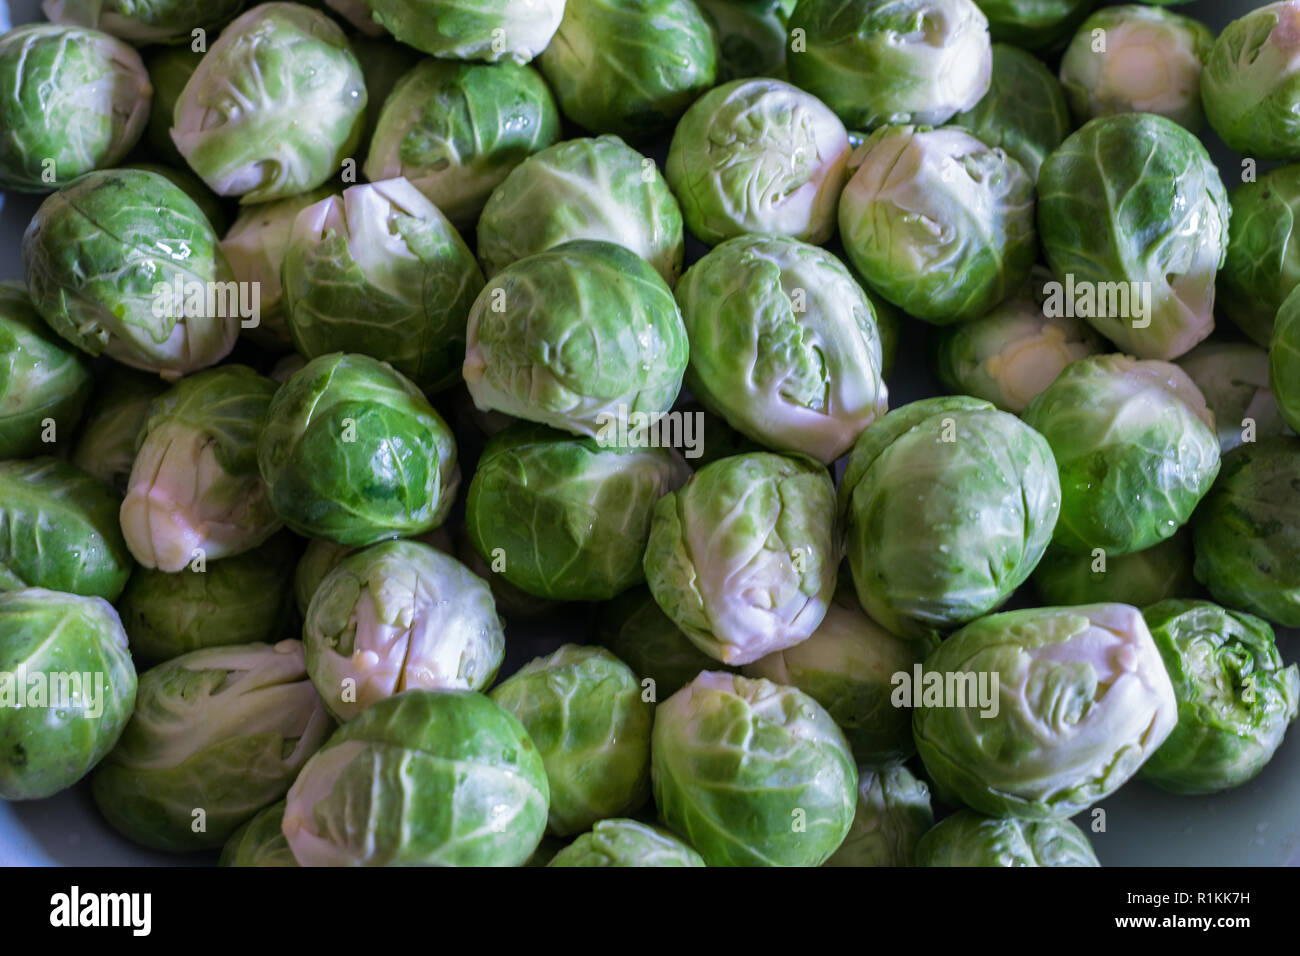 close-up of some fresh Brussels sprouts Stock Photo